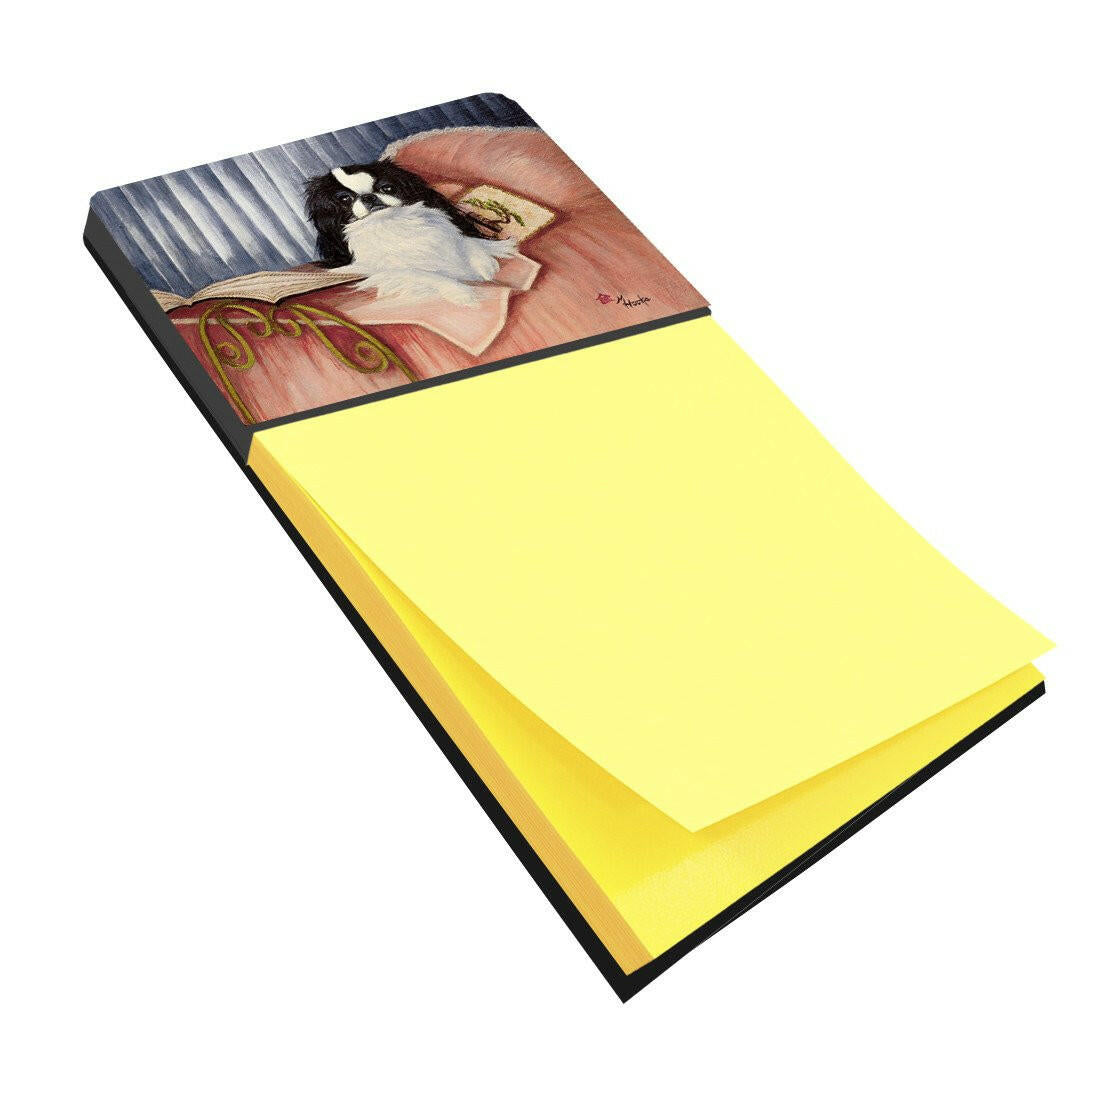 Japanese Chin Reading in Bed Sticky Note Holder MH1058SN by Caroline's Treasures